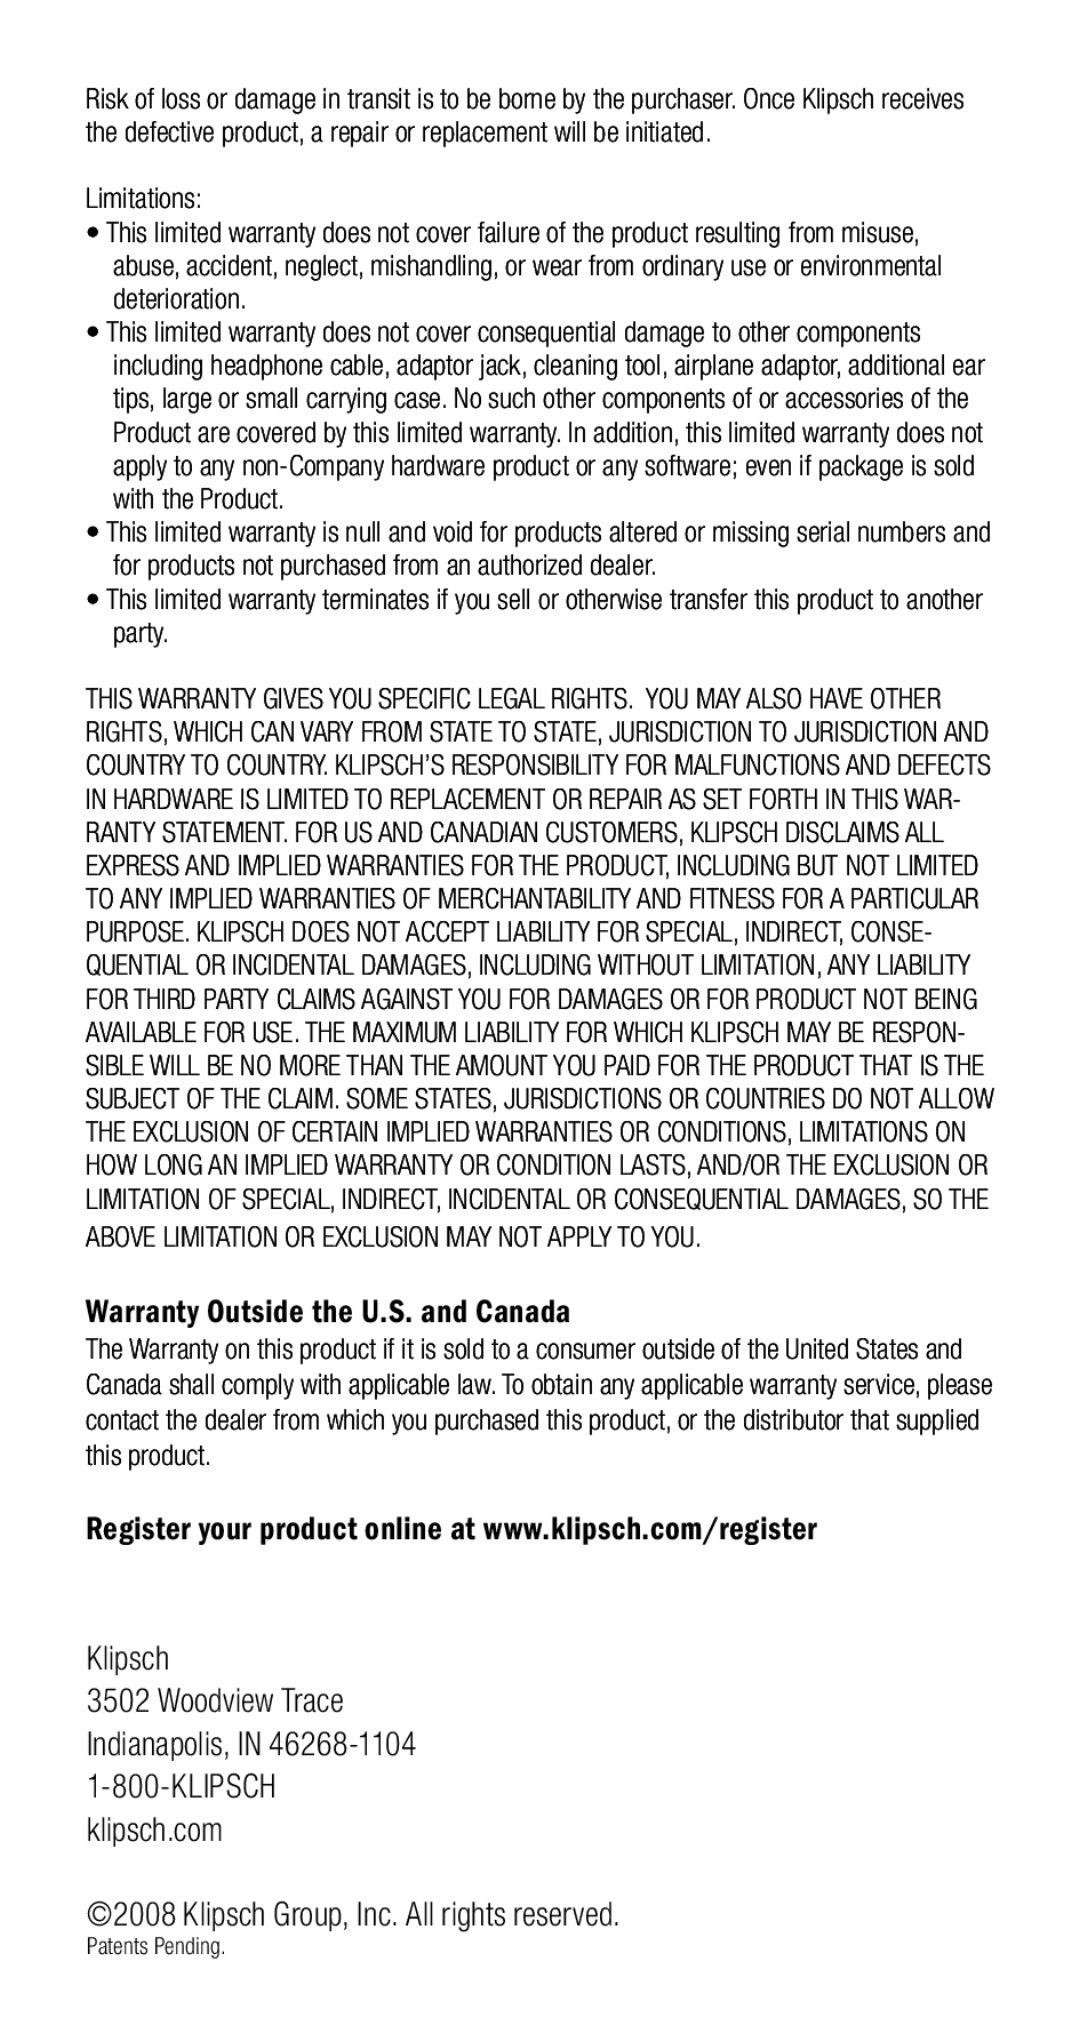 Klipsch 1010950 owner manual Warranty Outside the U.S. and Canada, Klipsch Group, Inc. All rights reserved 